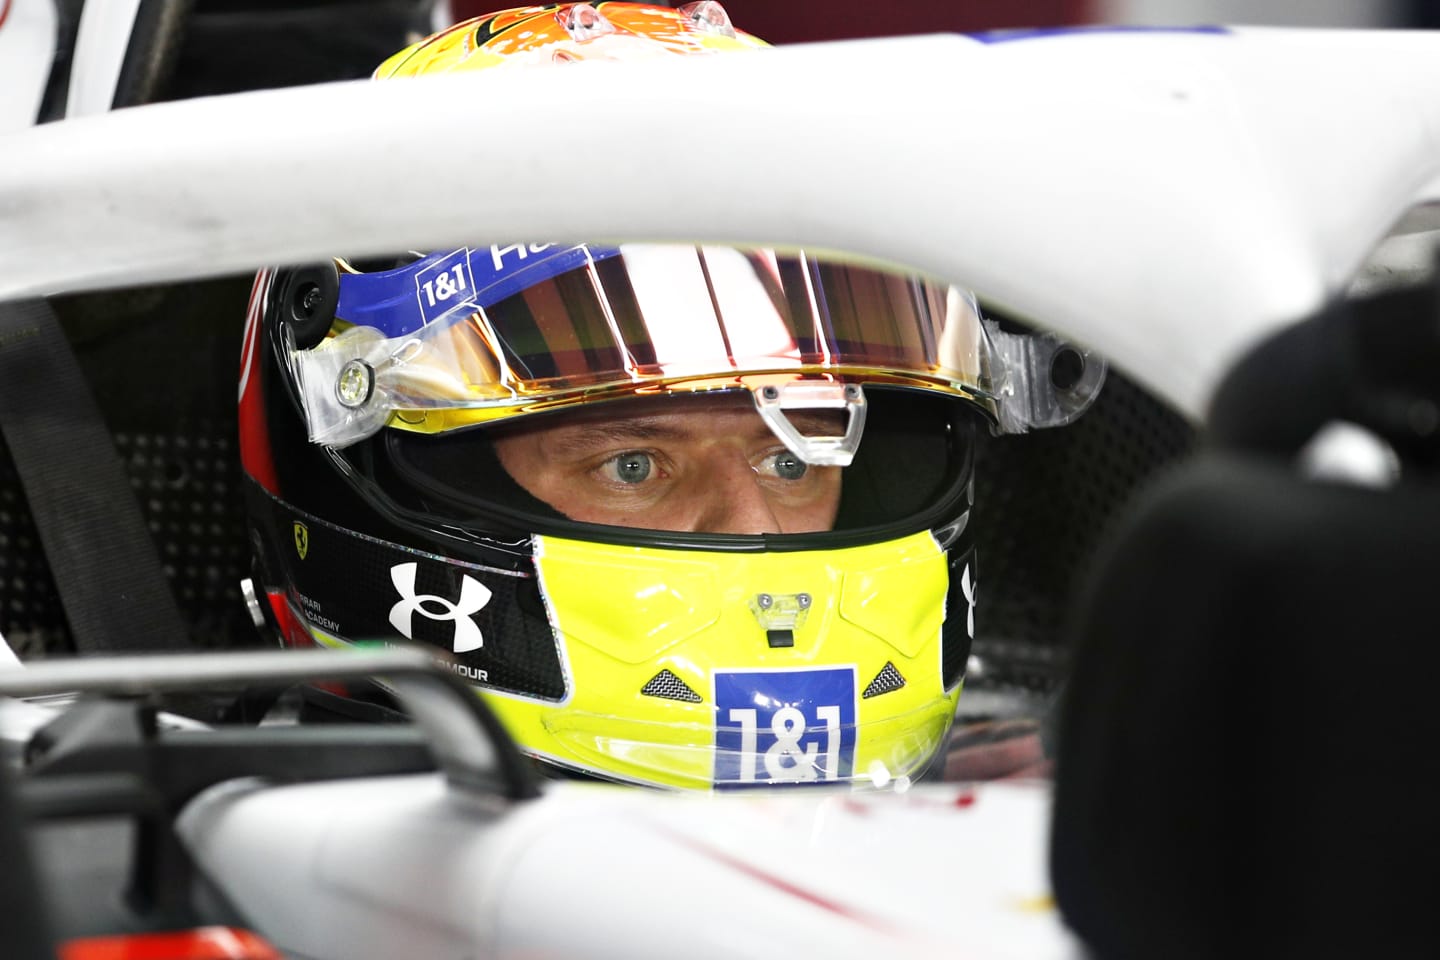 DOHA, QATAR - NOVEMBER 20: Mick Schumacher of Germany and Haas F1 prepares to drive in the garage during qualifying ahead of the F1 Grand Prix of Qatar at Losail International Circuit on November 20, 2021 in Doha, Qatar. (Photo by Hamad I Mohammed - Pool/Getty Images)